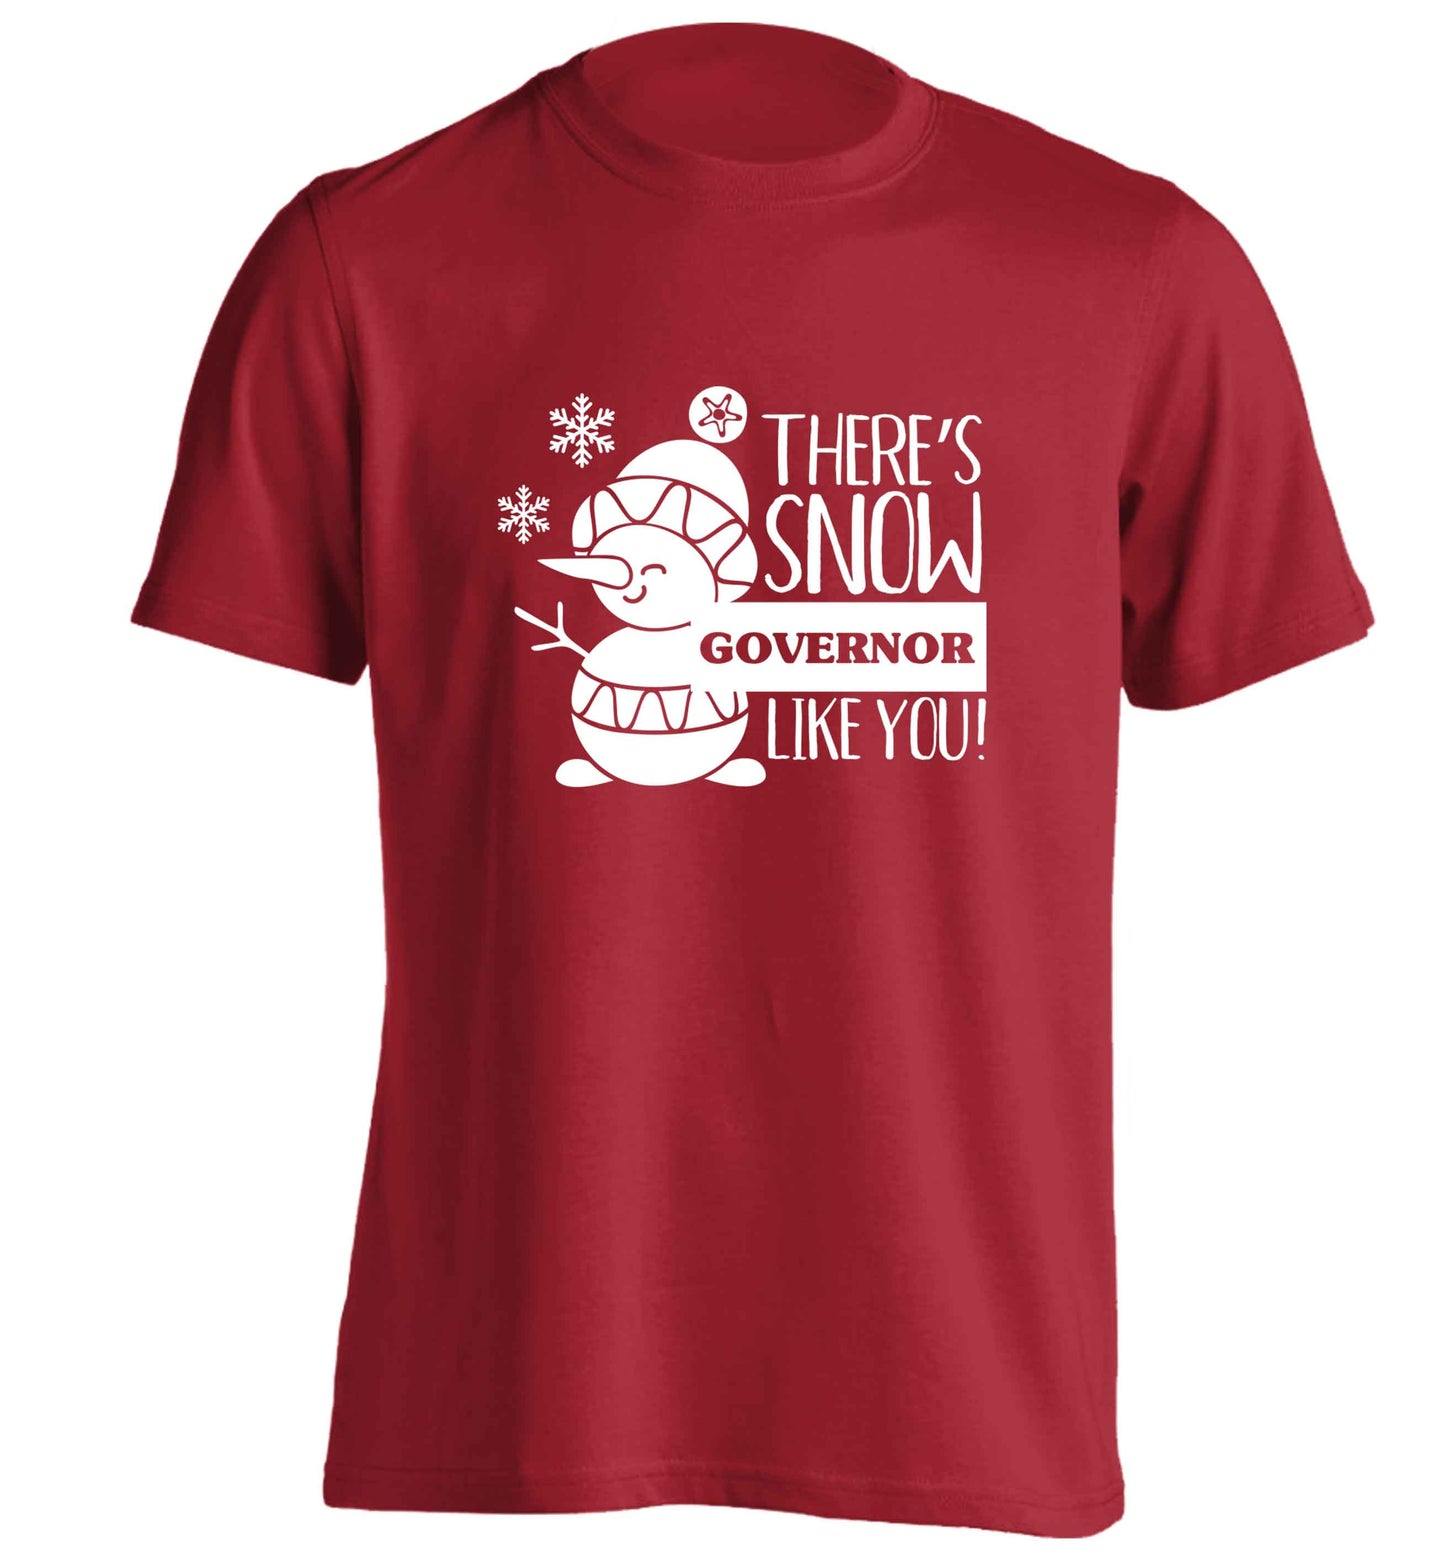 There's snow governor like you adults unisex red Tshirt 2XL